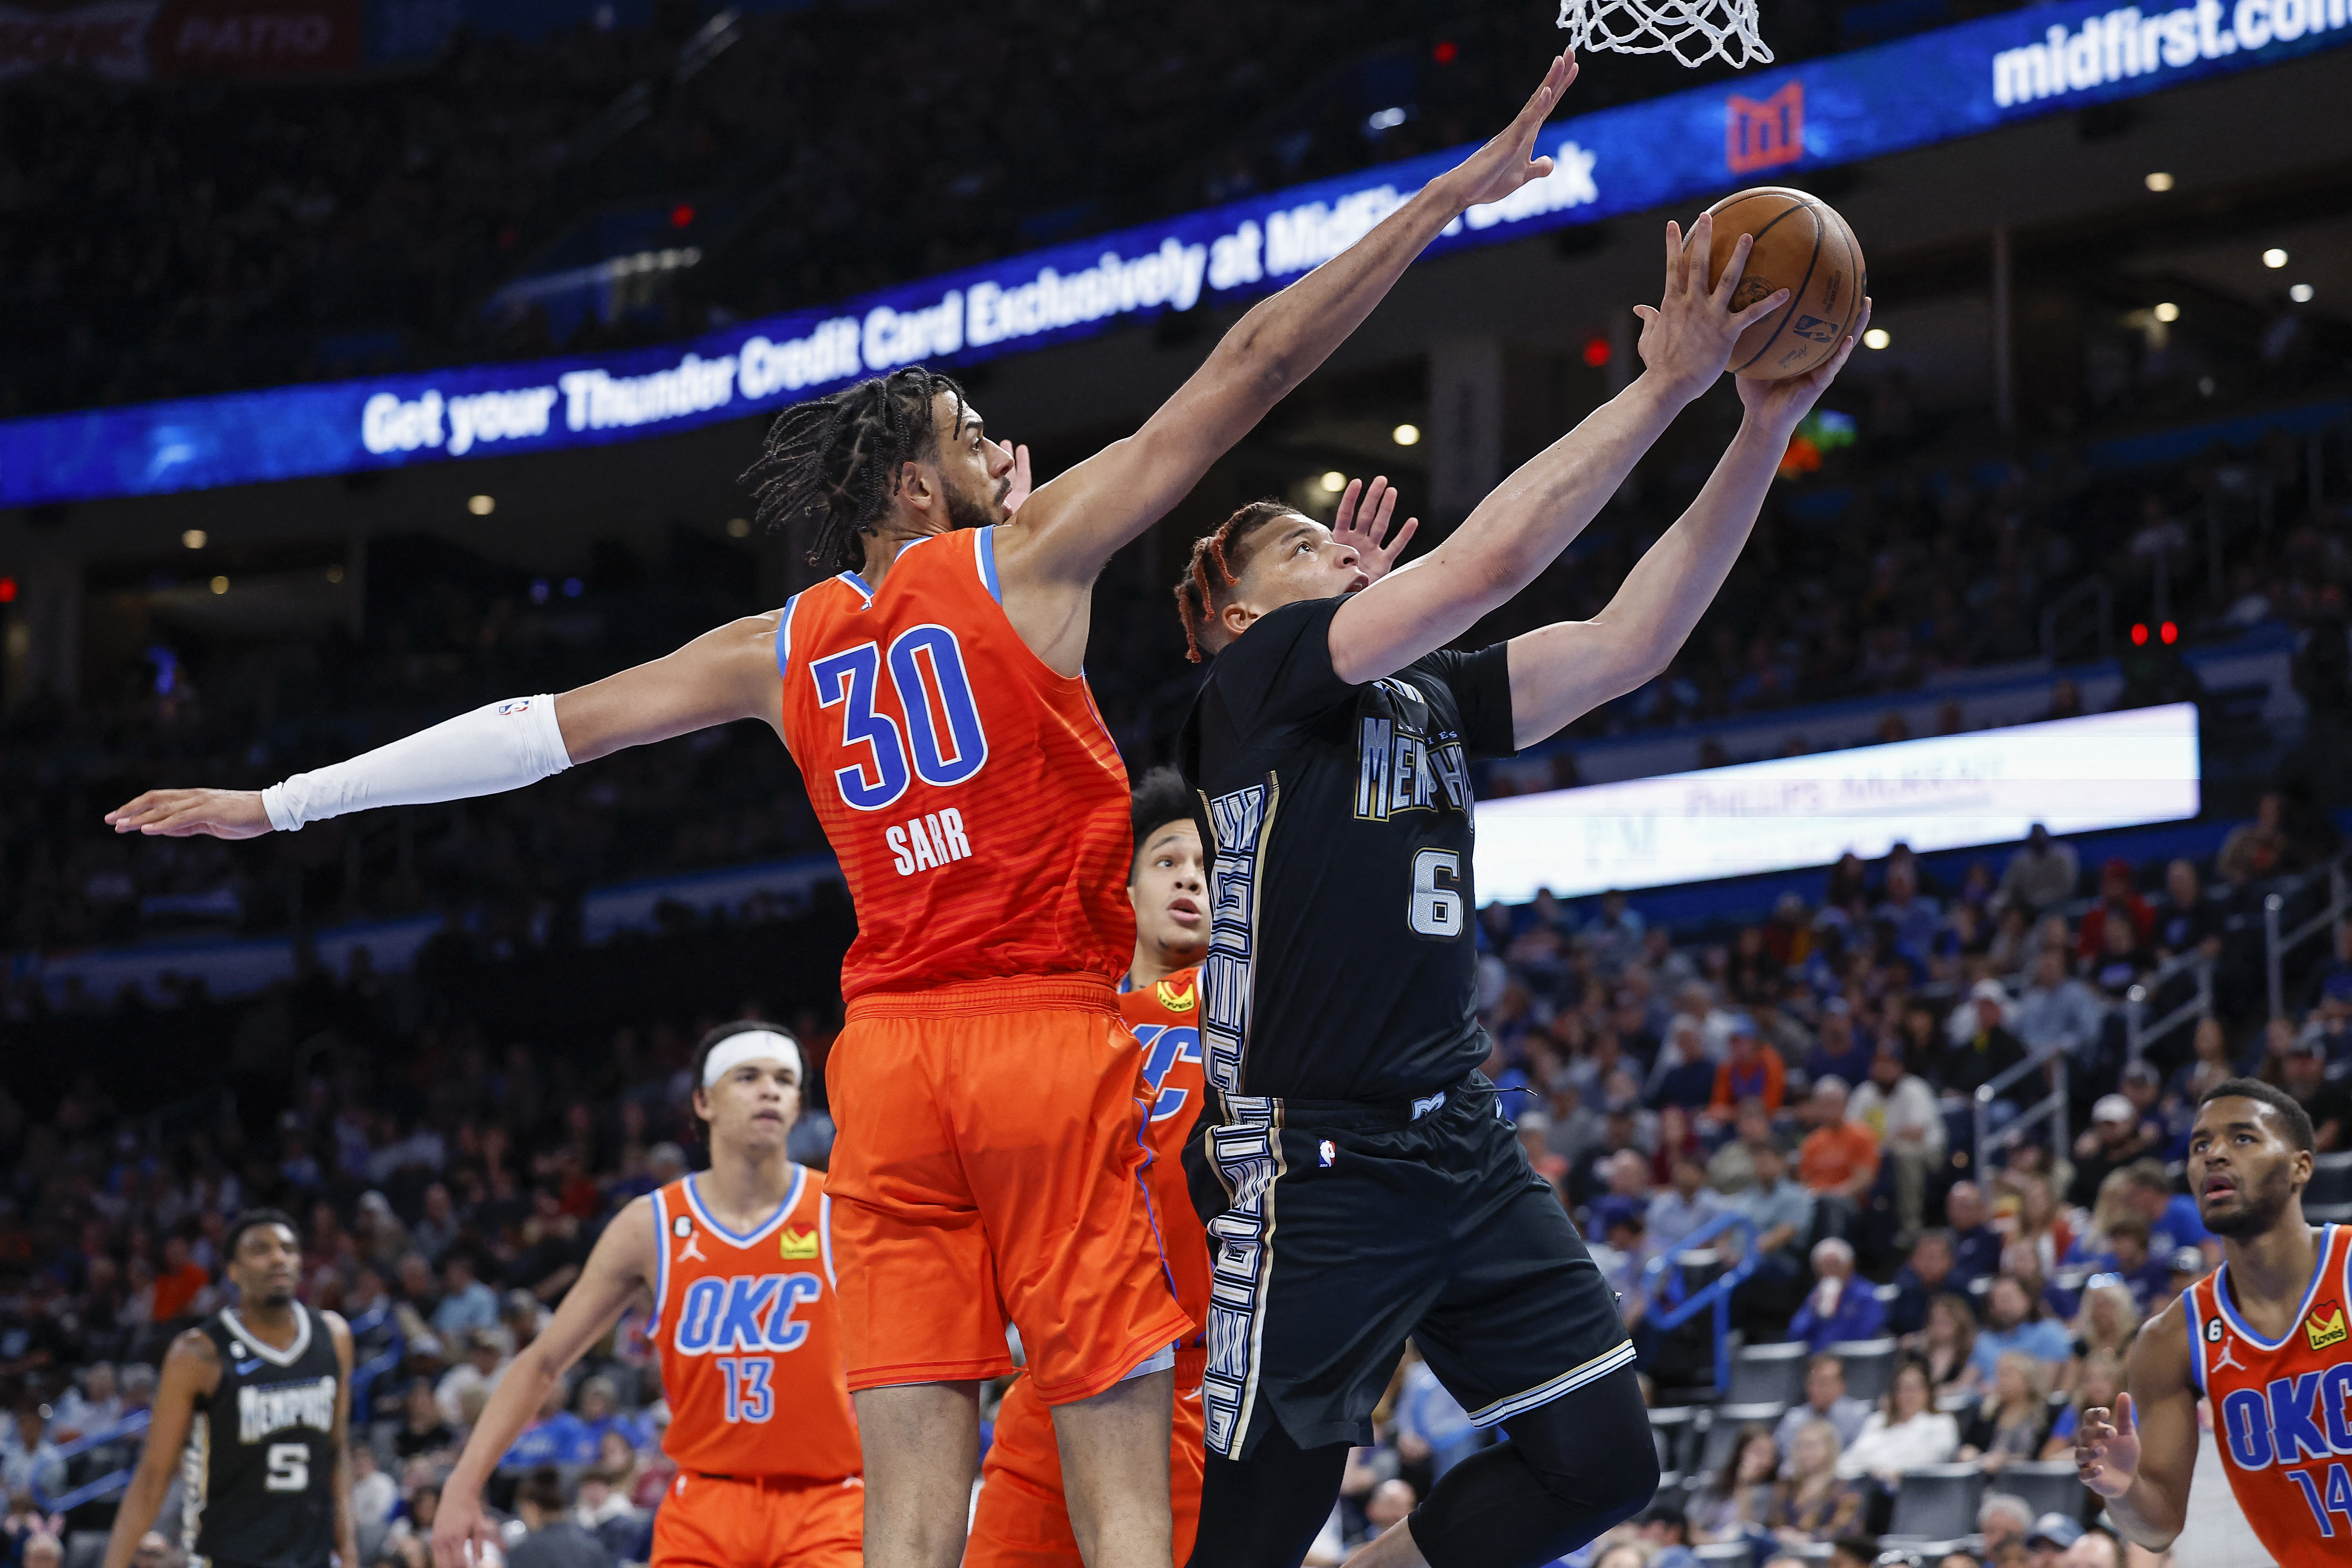 NBA result: Thunder tunes up for play-in round with victory over Grizzlies  - Sportstar